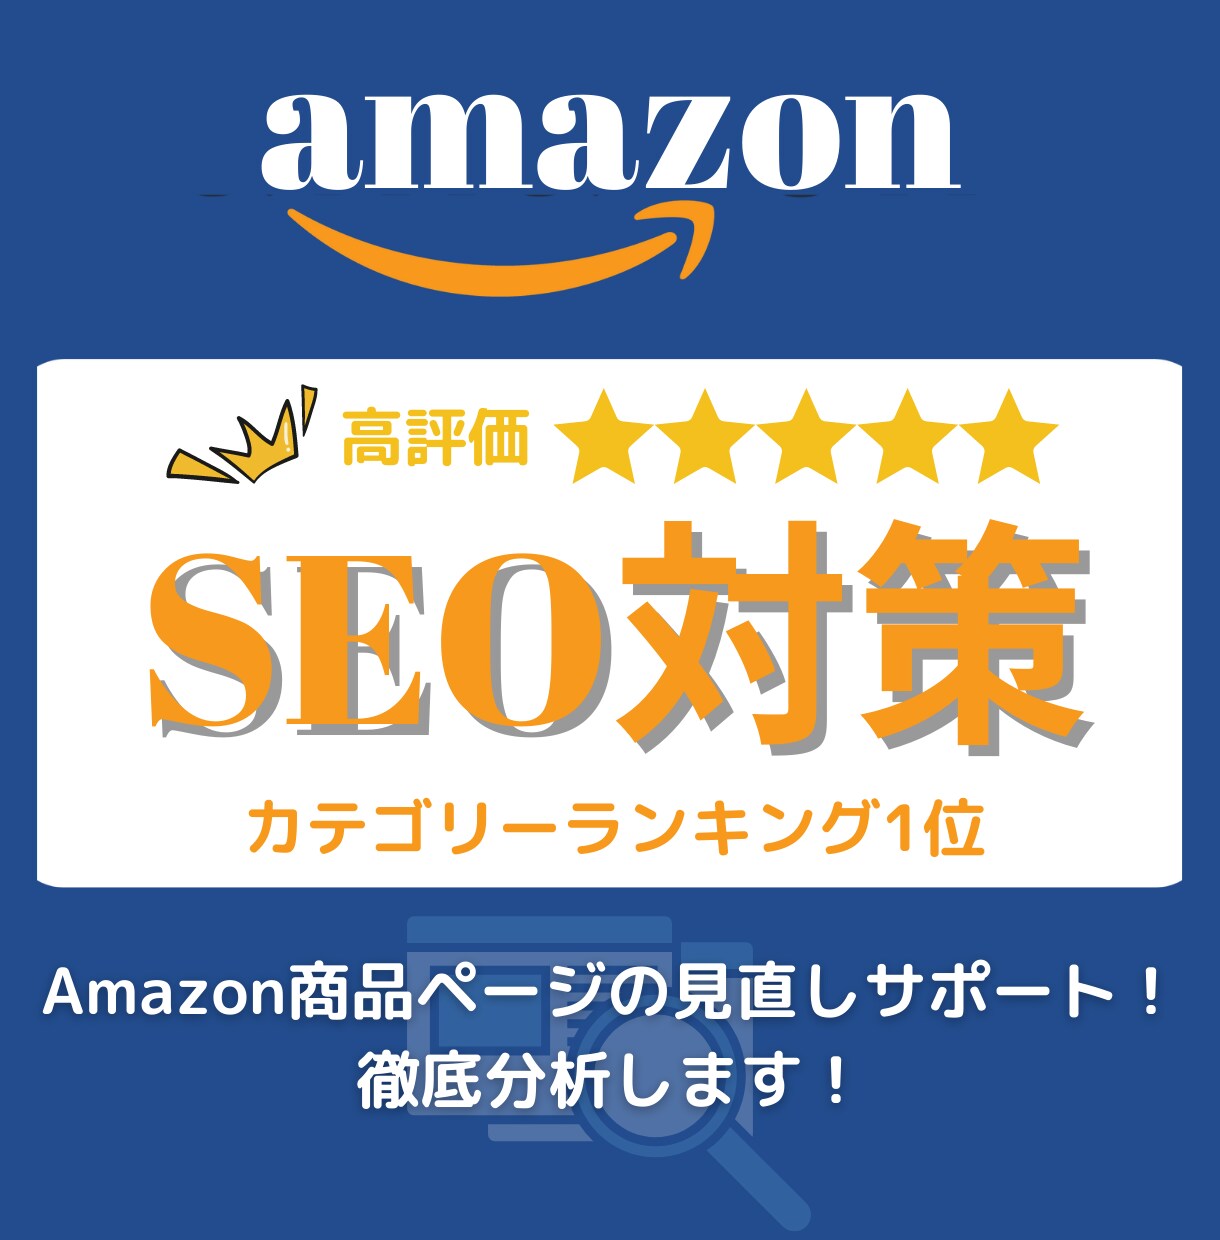 💬 Coconala ｜ I will teach you tips for Amazon product page SEO measures Hajime consultant 5.0 …